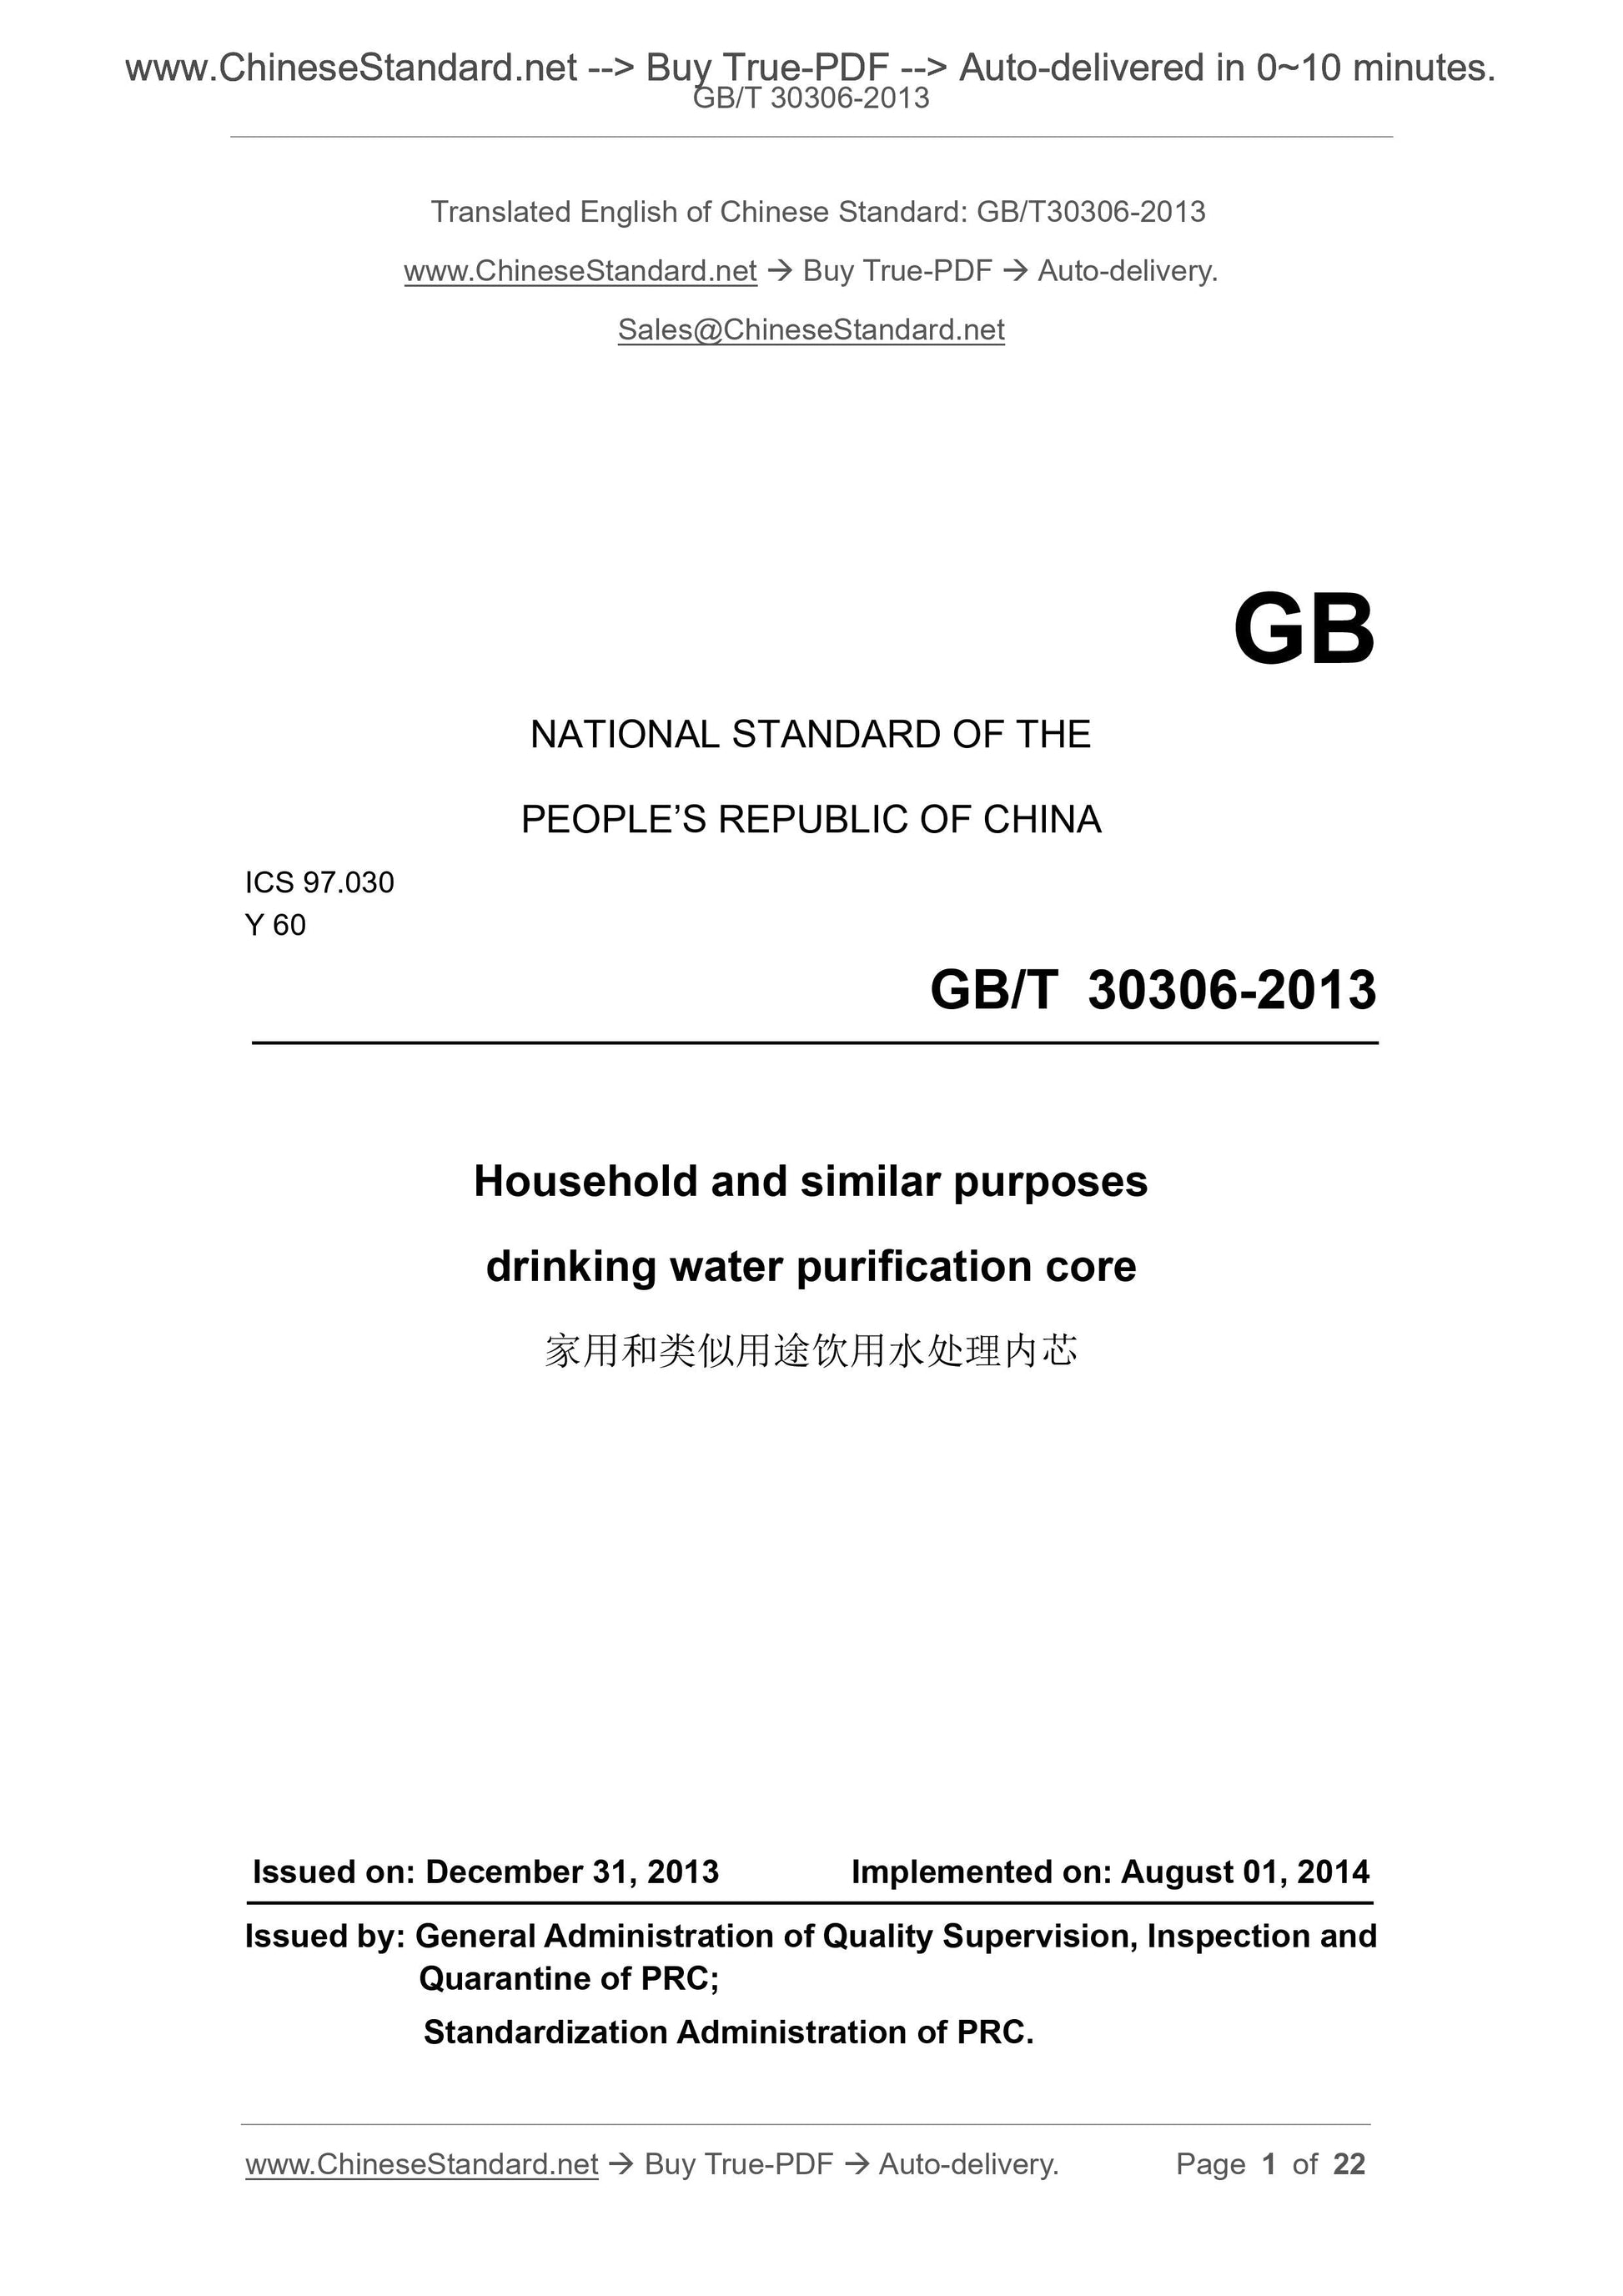 GB/T 30306-2013 Page 1